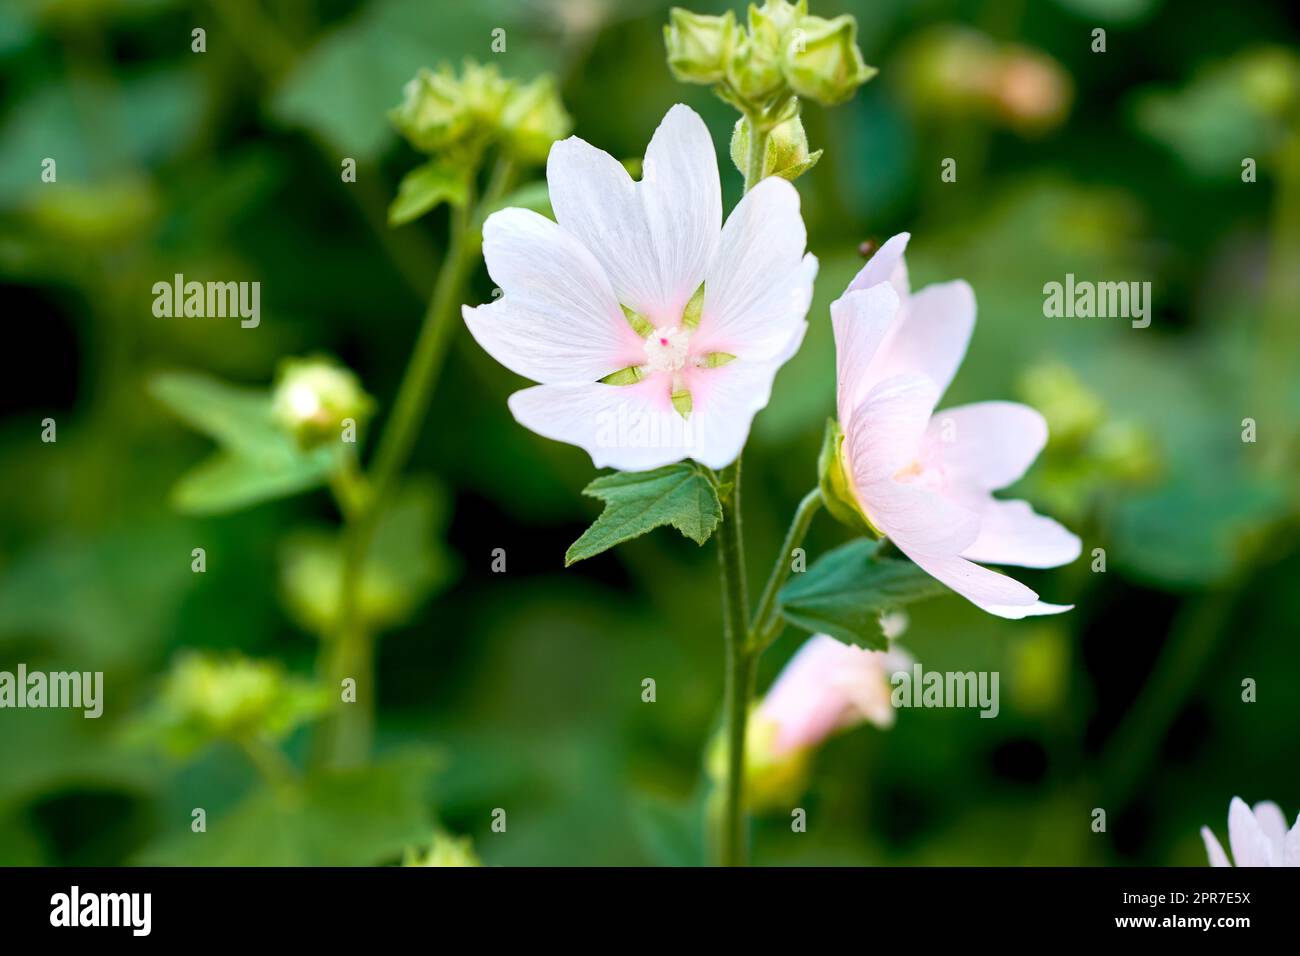 White angel or wrightia antidysenterica flowers growing in a green backyard or garden against a nature background. Beautiful flowering plants flourishing, blossoming and blooming during spring Stock Photo